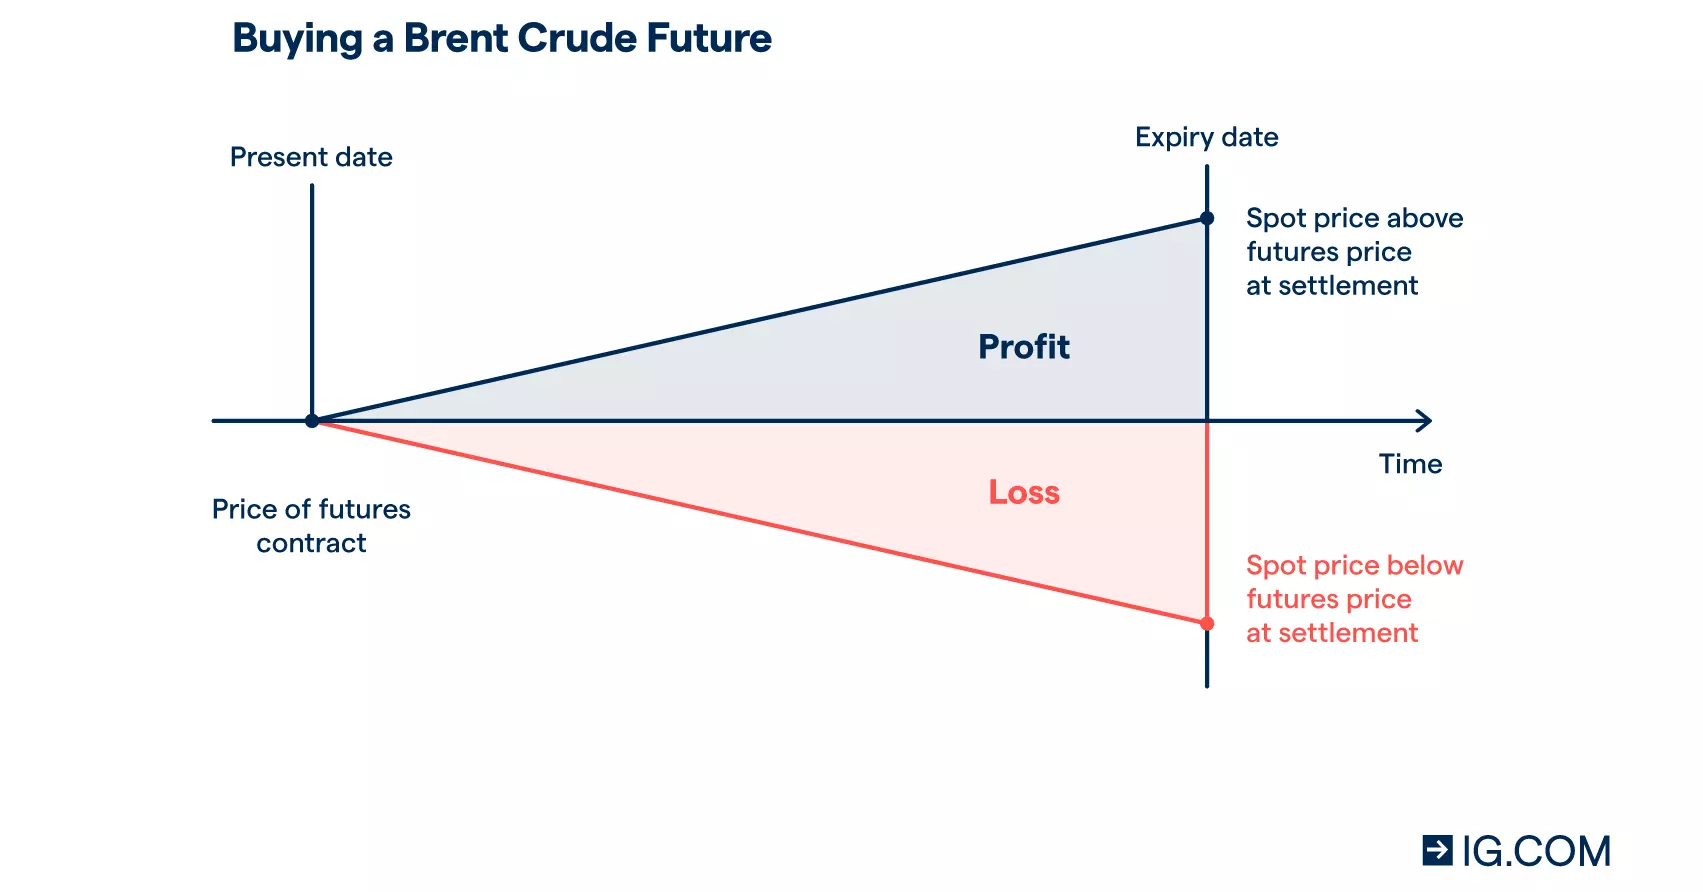 Buying a Brent crude future contract at the current price can either result in a profit when the spot price is above the futures price at settlement expiry date or result in a loss when the spot price is below the futures price at settlement expiry date